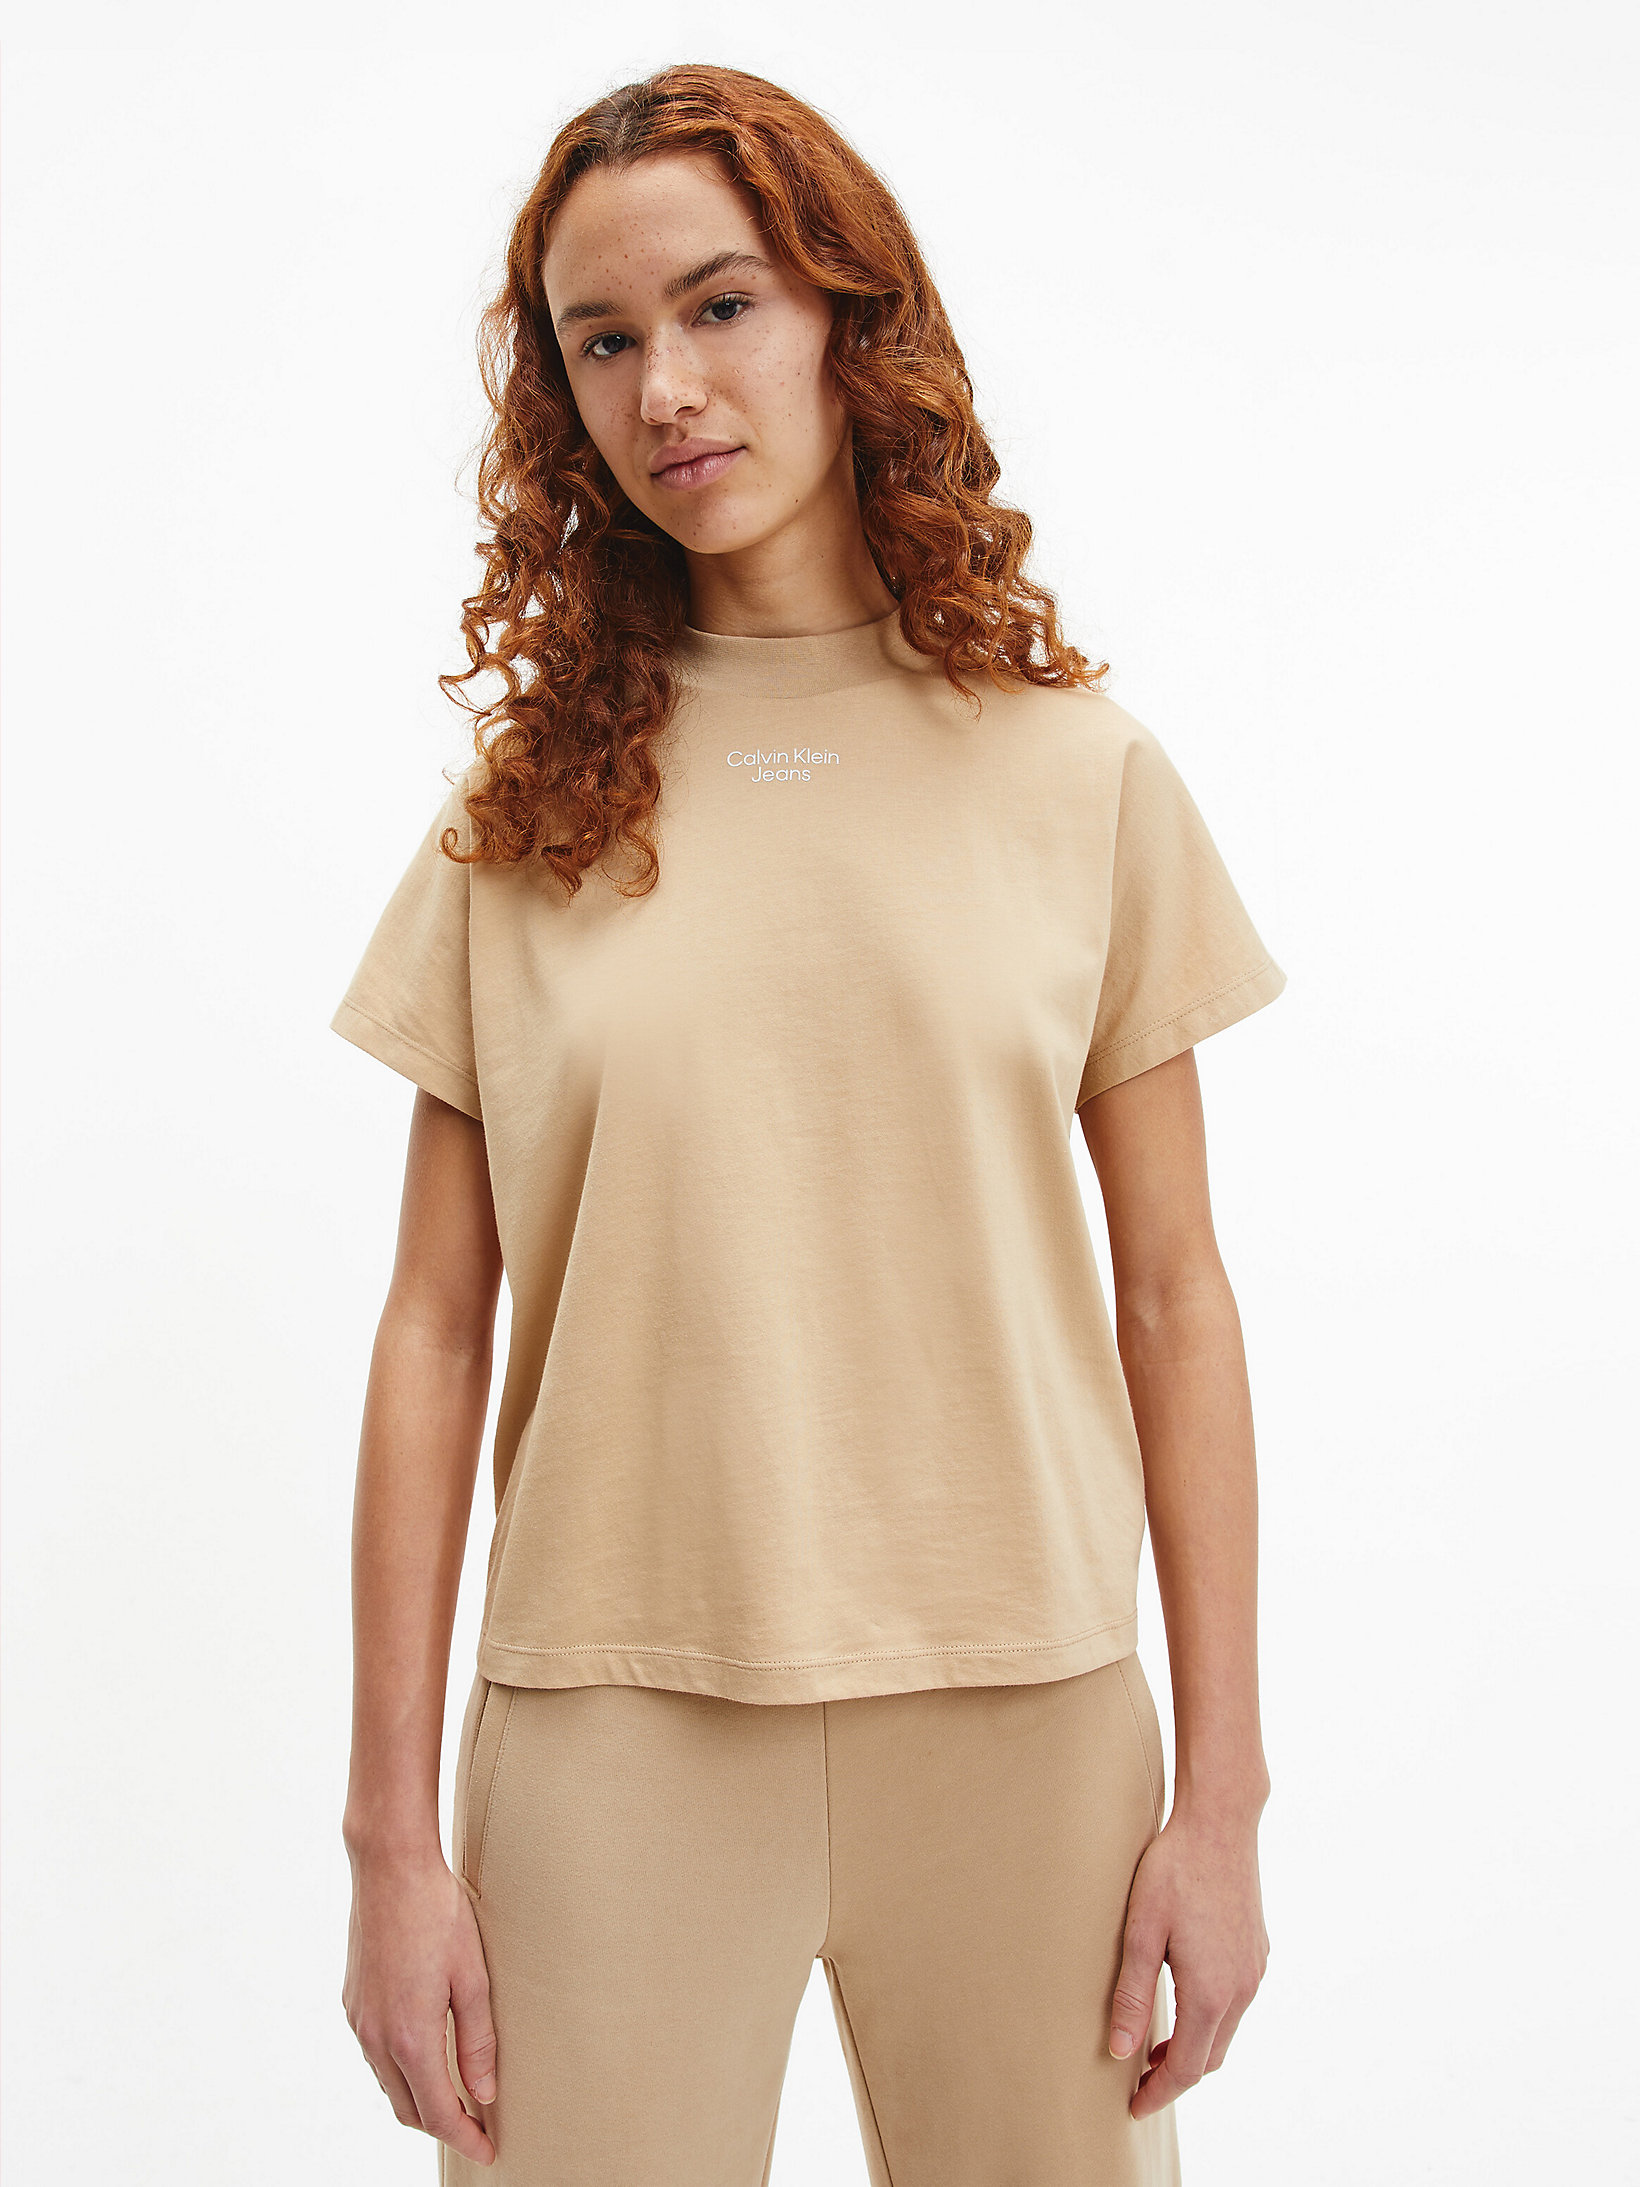 Tawny Sand T-Shirt In Cotone Biologico Taglio Relaxed undefined donna Calvin Klein